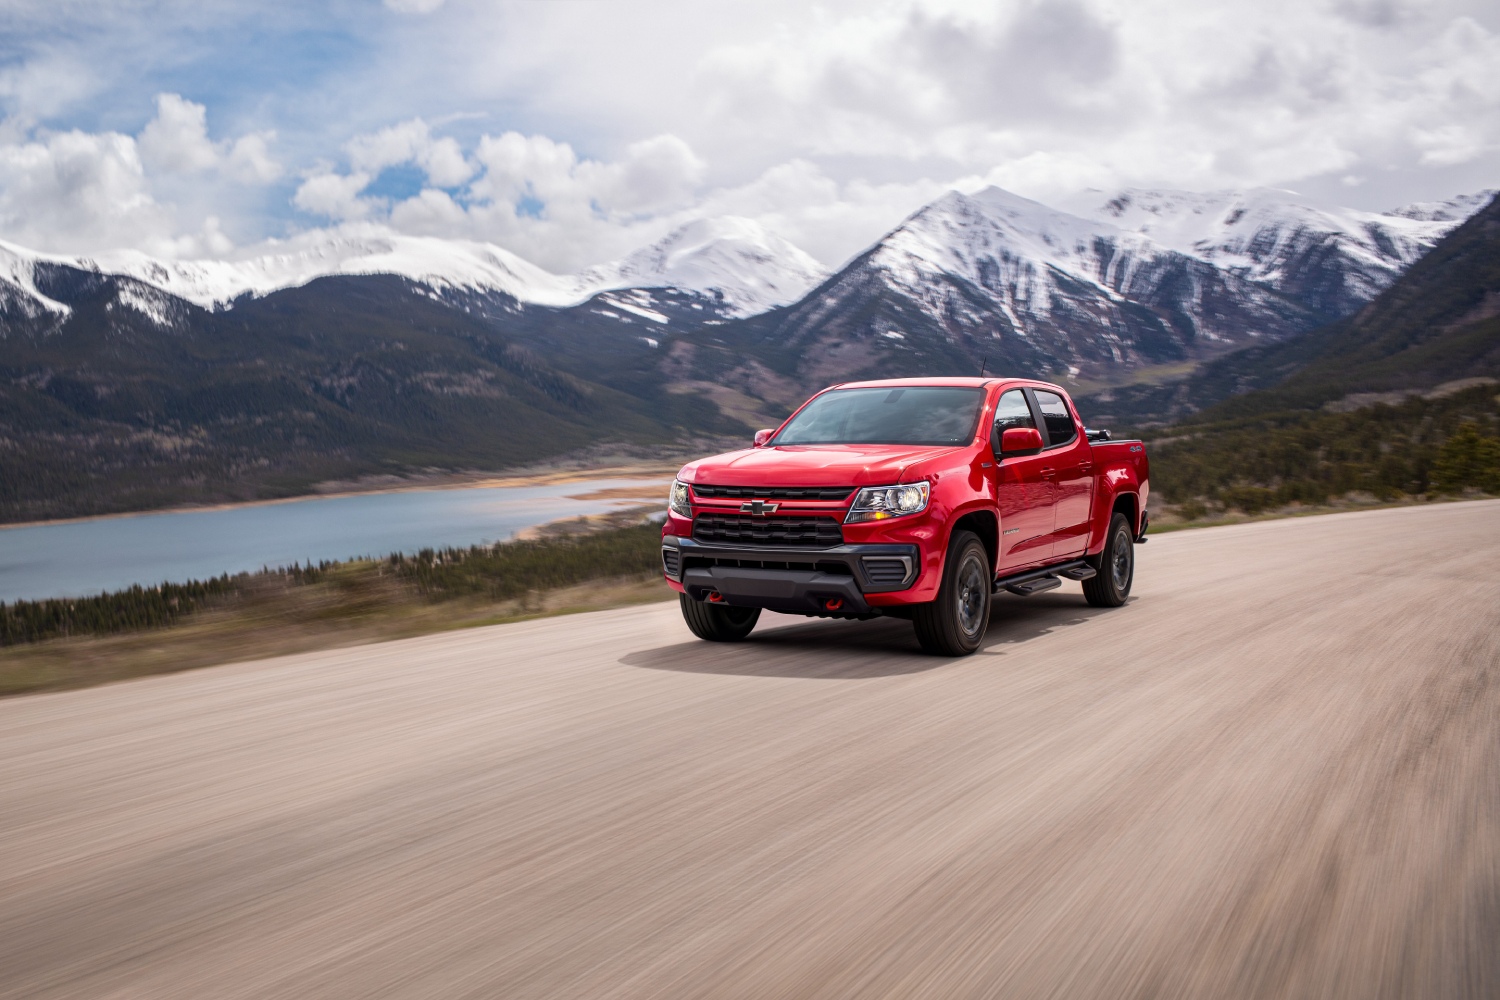 The best diesel trucks for towing include the Chevy Colorado